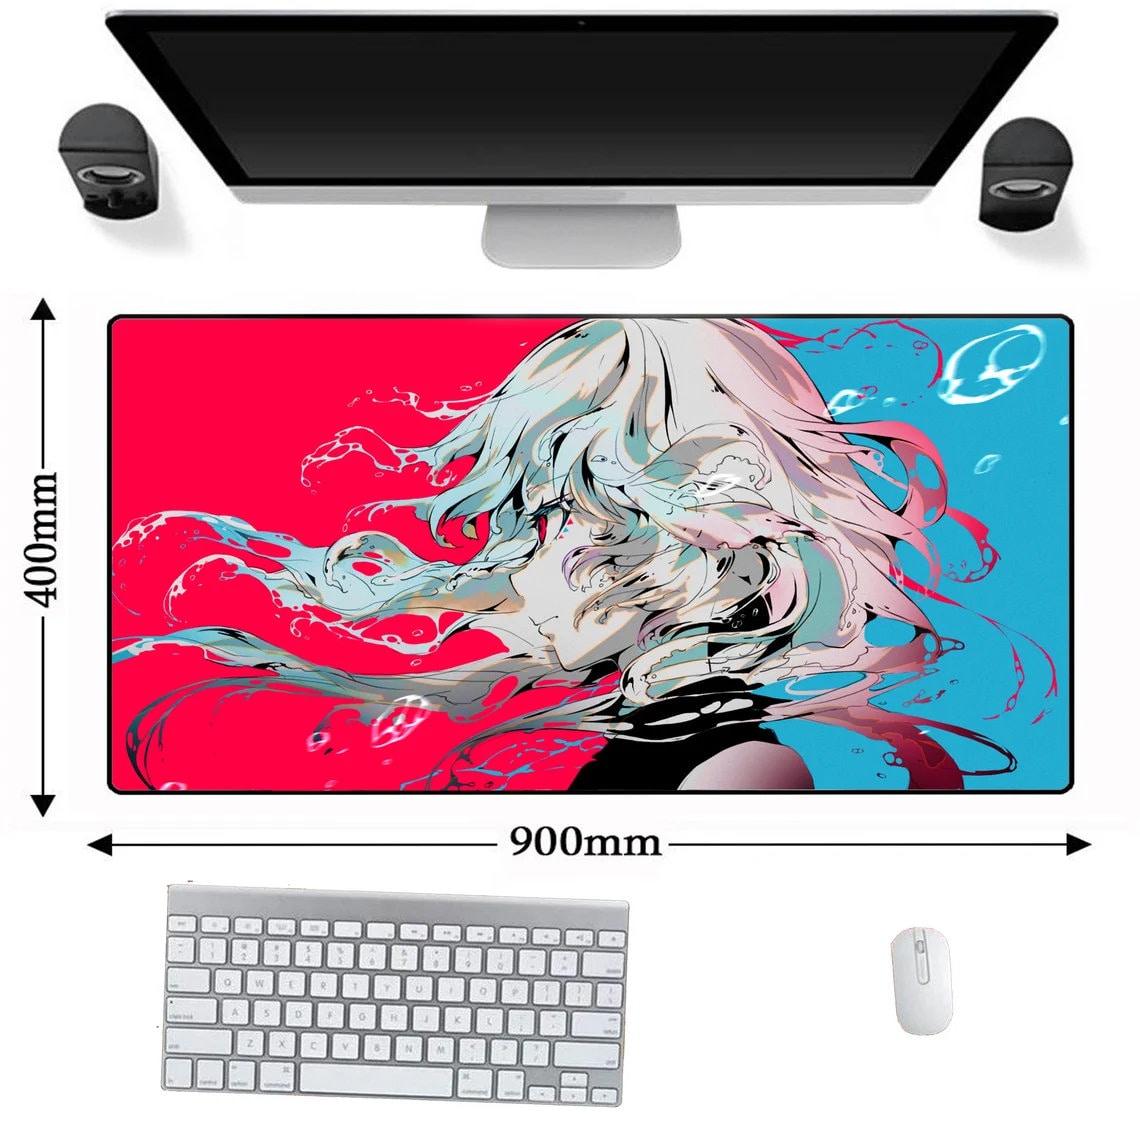 Buy Anime Mouse Pad Online In India  Etsy India